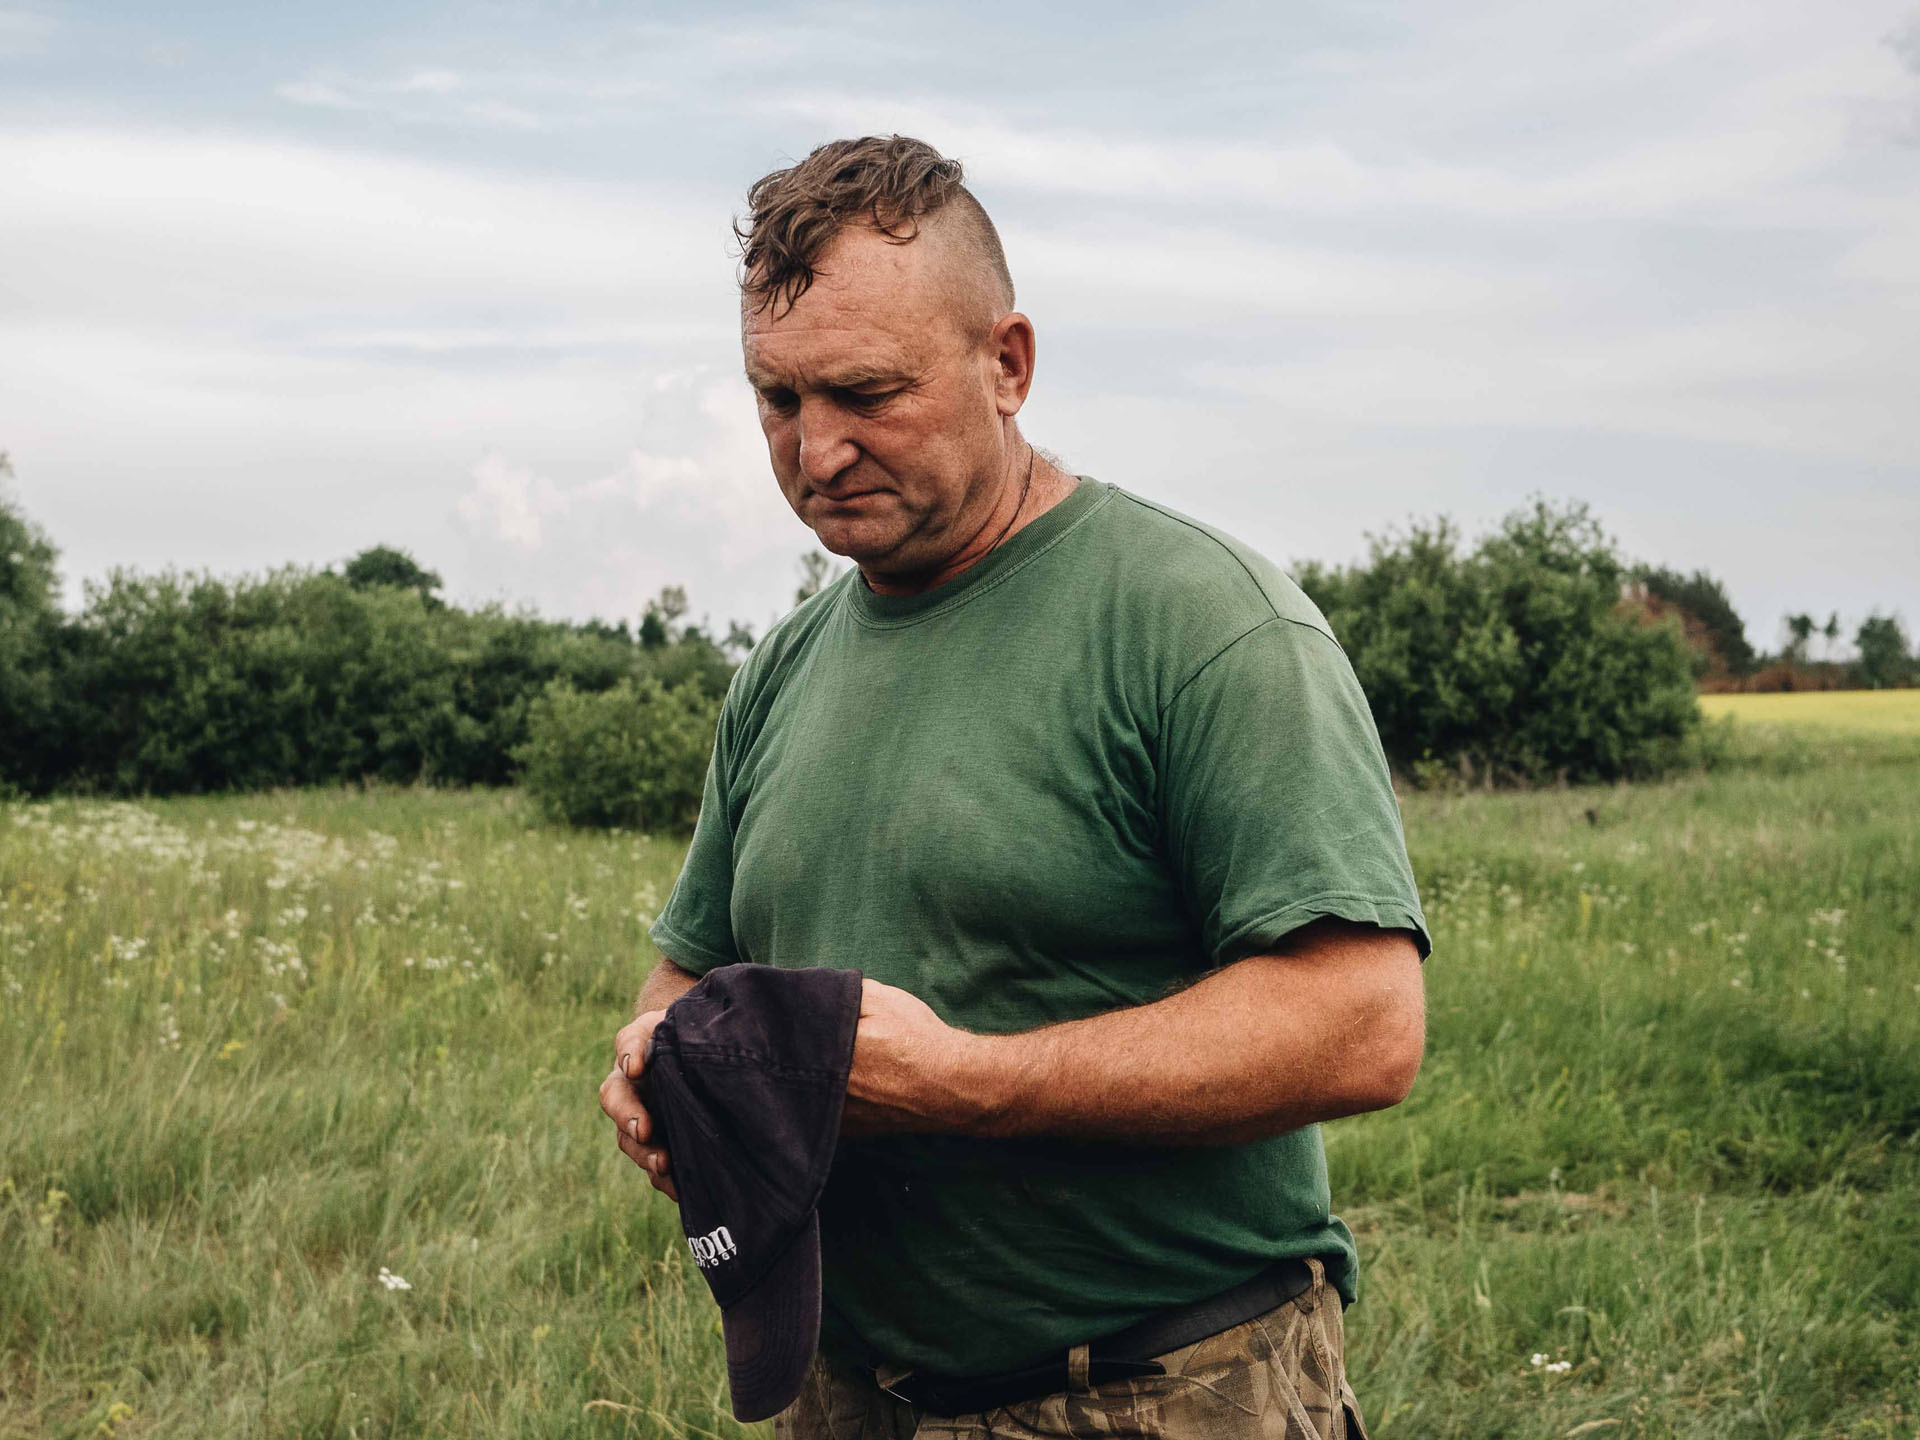 Ilir Tsouko, from the series Starting Over: From the Donbass to Chernobyl